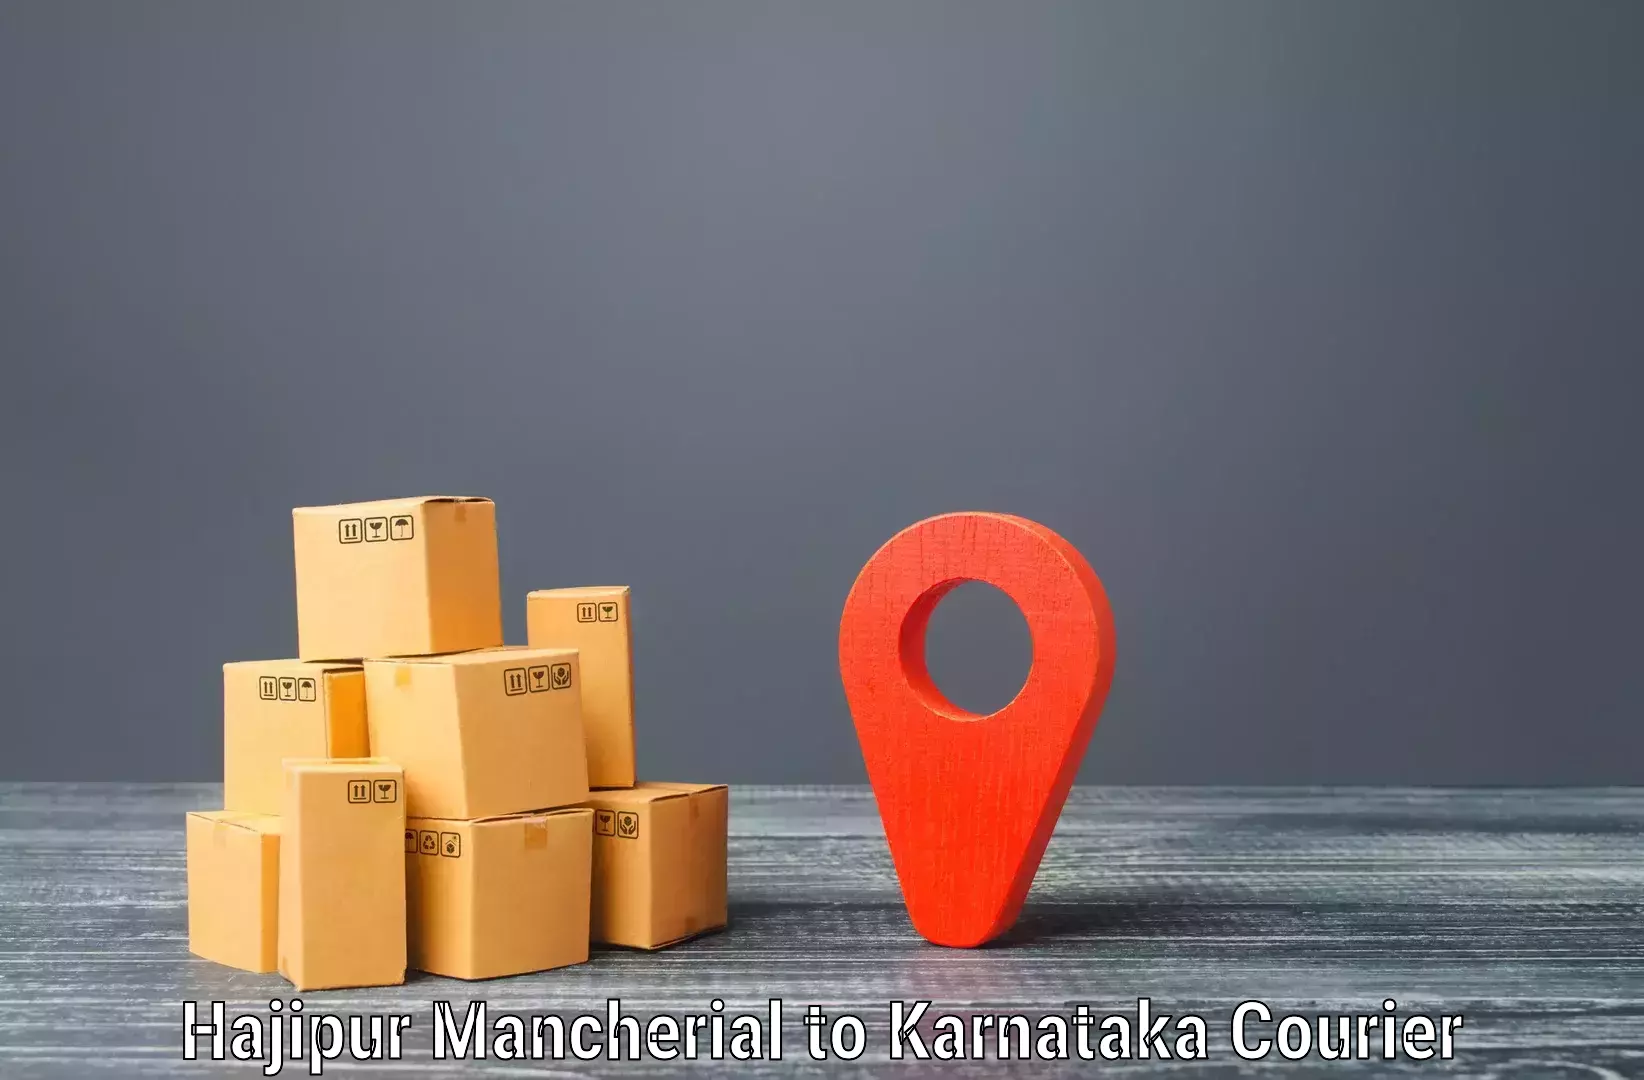 Customer-friendly courier services Hajipur Mancherial to Kolhar